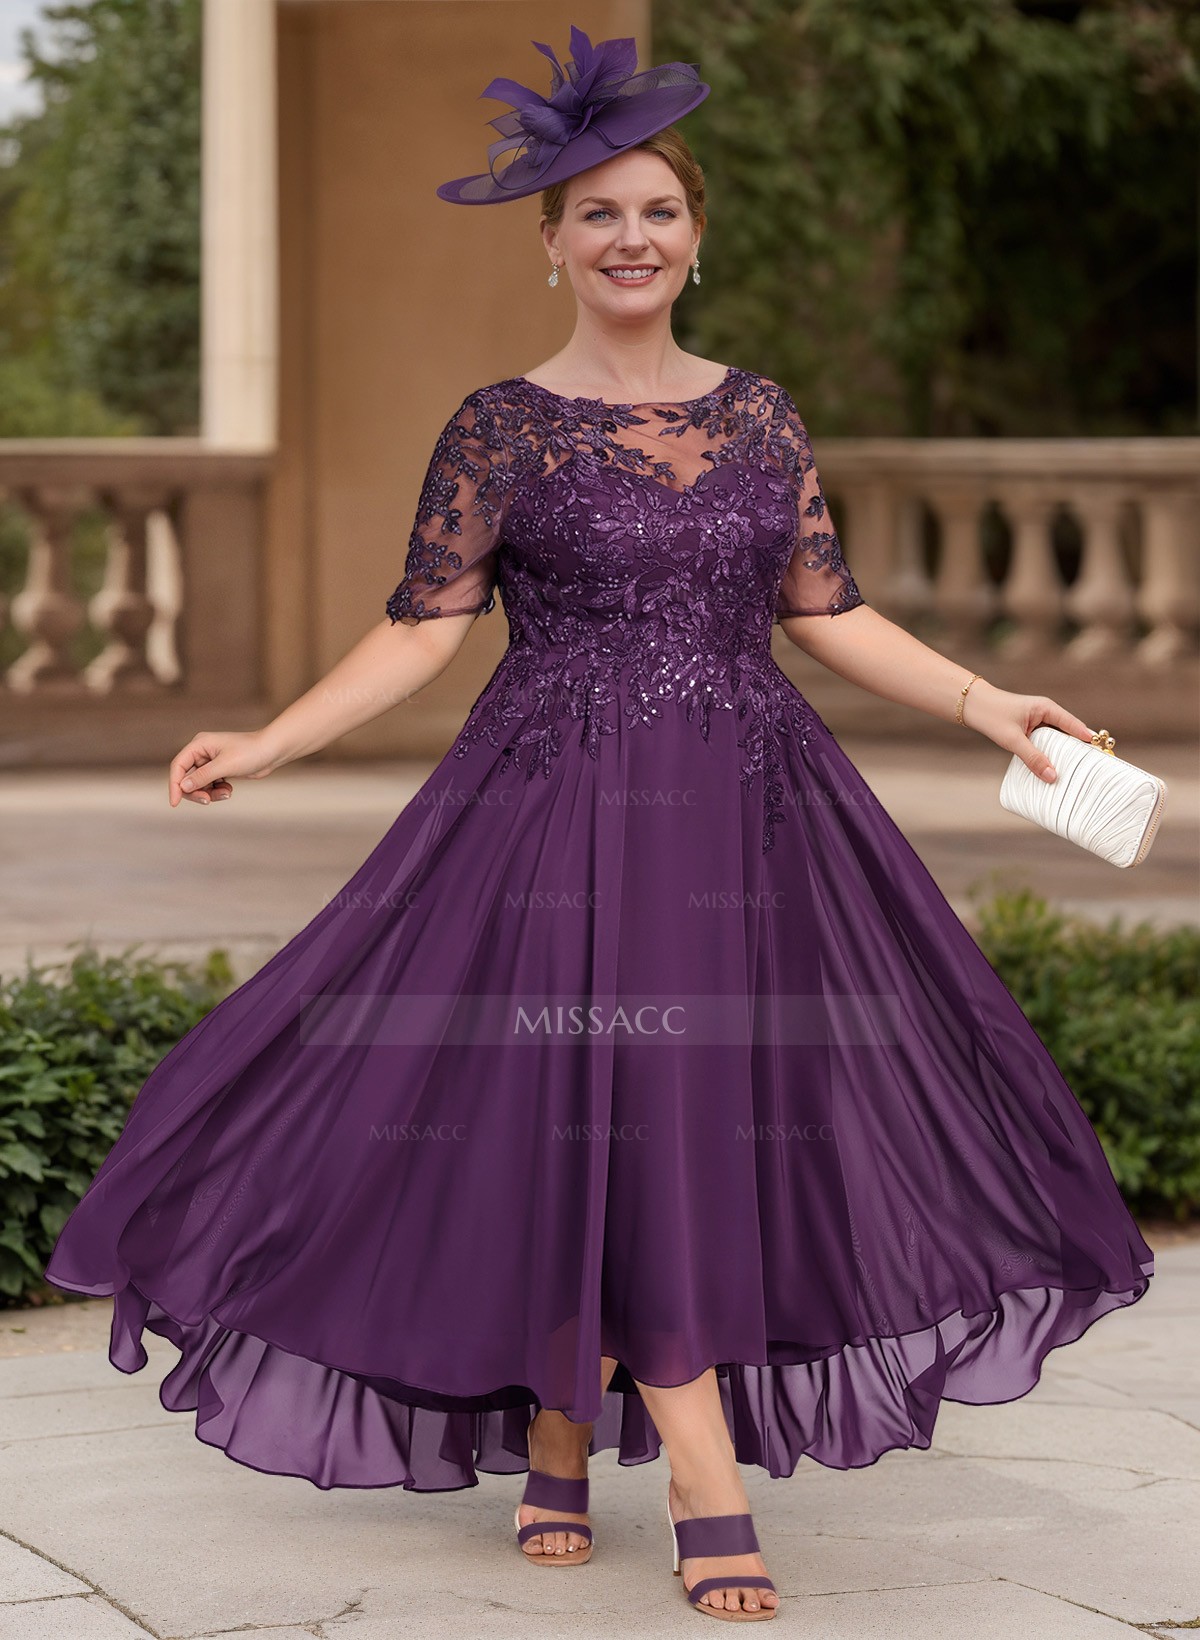 A-Line Illusion Neck 1/2 Sleeves Chiffon Mother Of The Bride Dresses With Lace